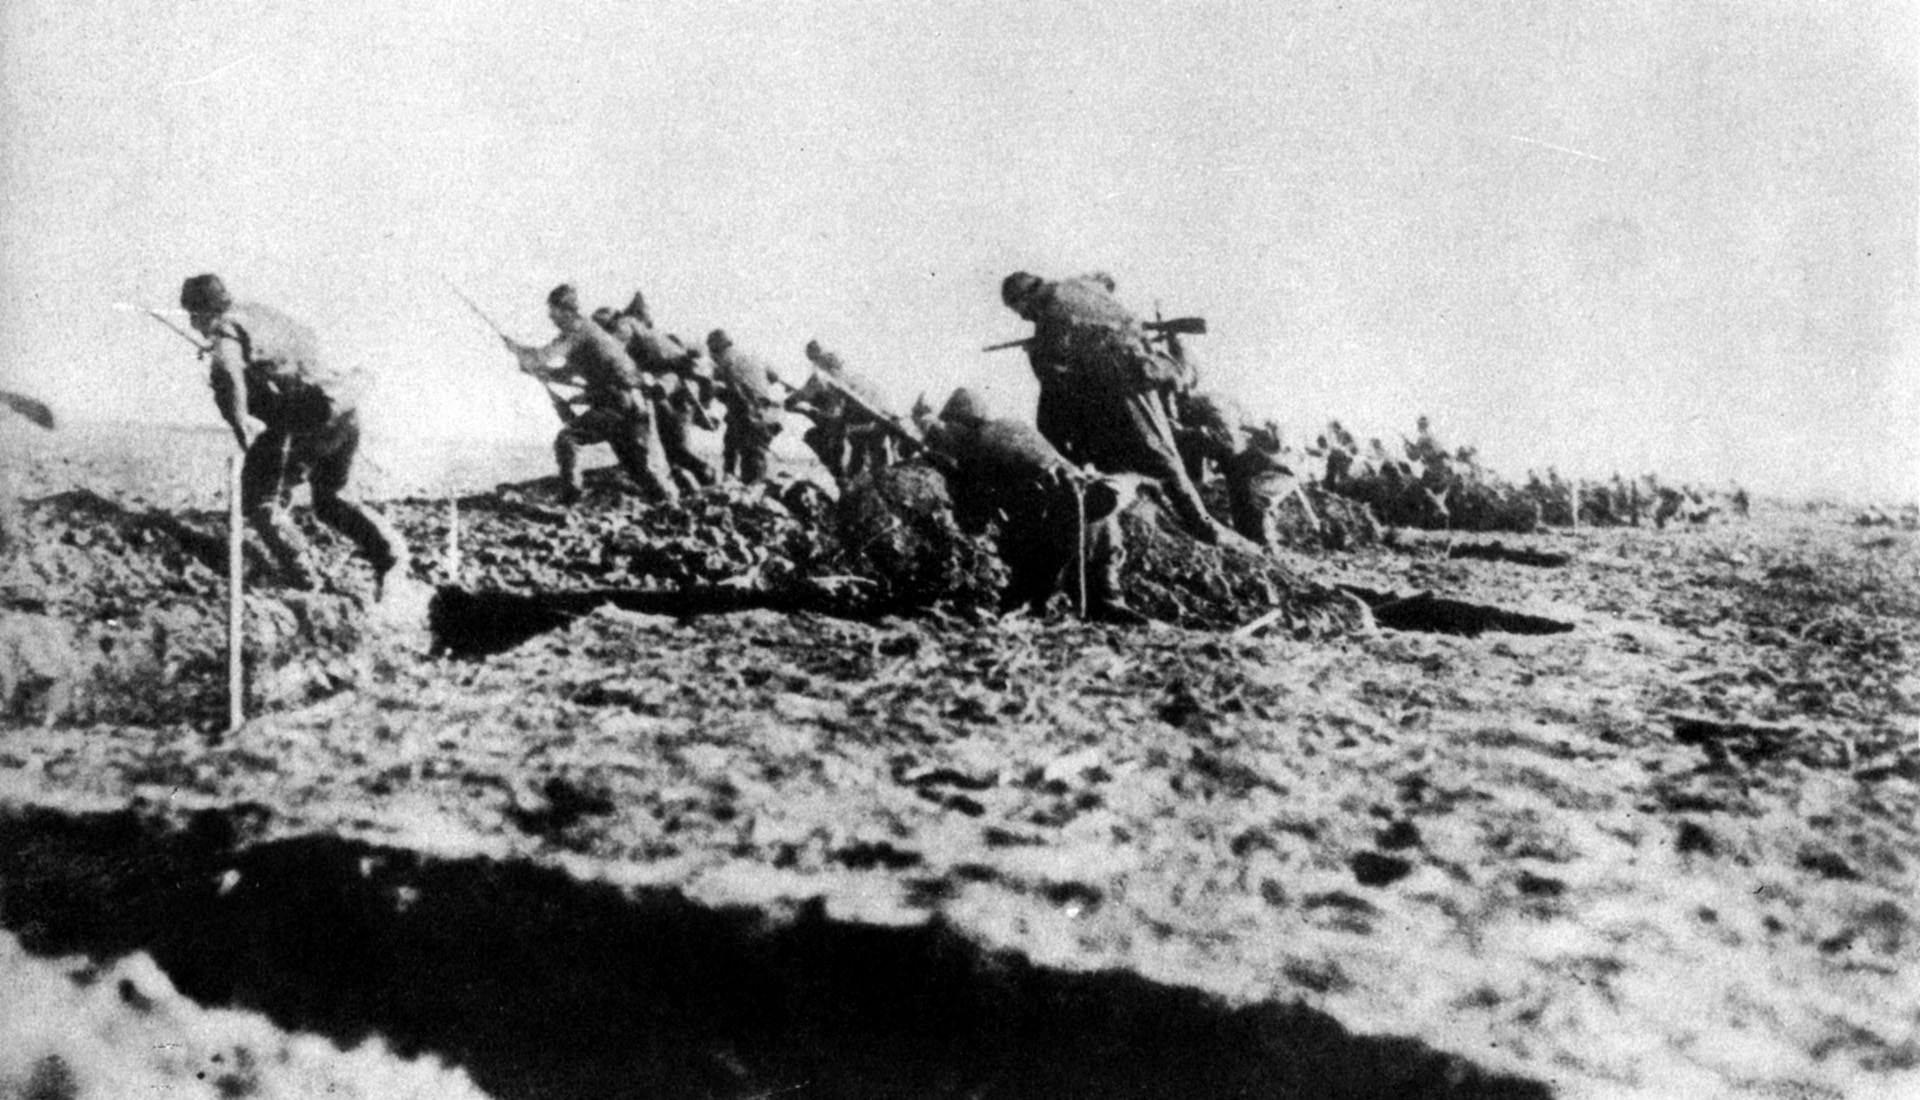 The Turks launched repeated counterattacks against British and ANZAC forces at Gallipoli in a bid to dislodge them from key terrain. The costly counterattacks resulted in Ottoman casualties exceeding 200,000 men.